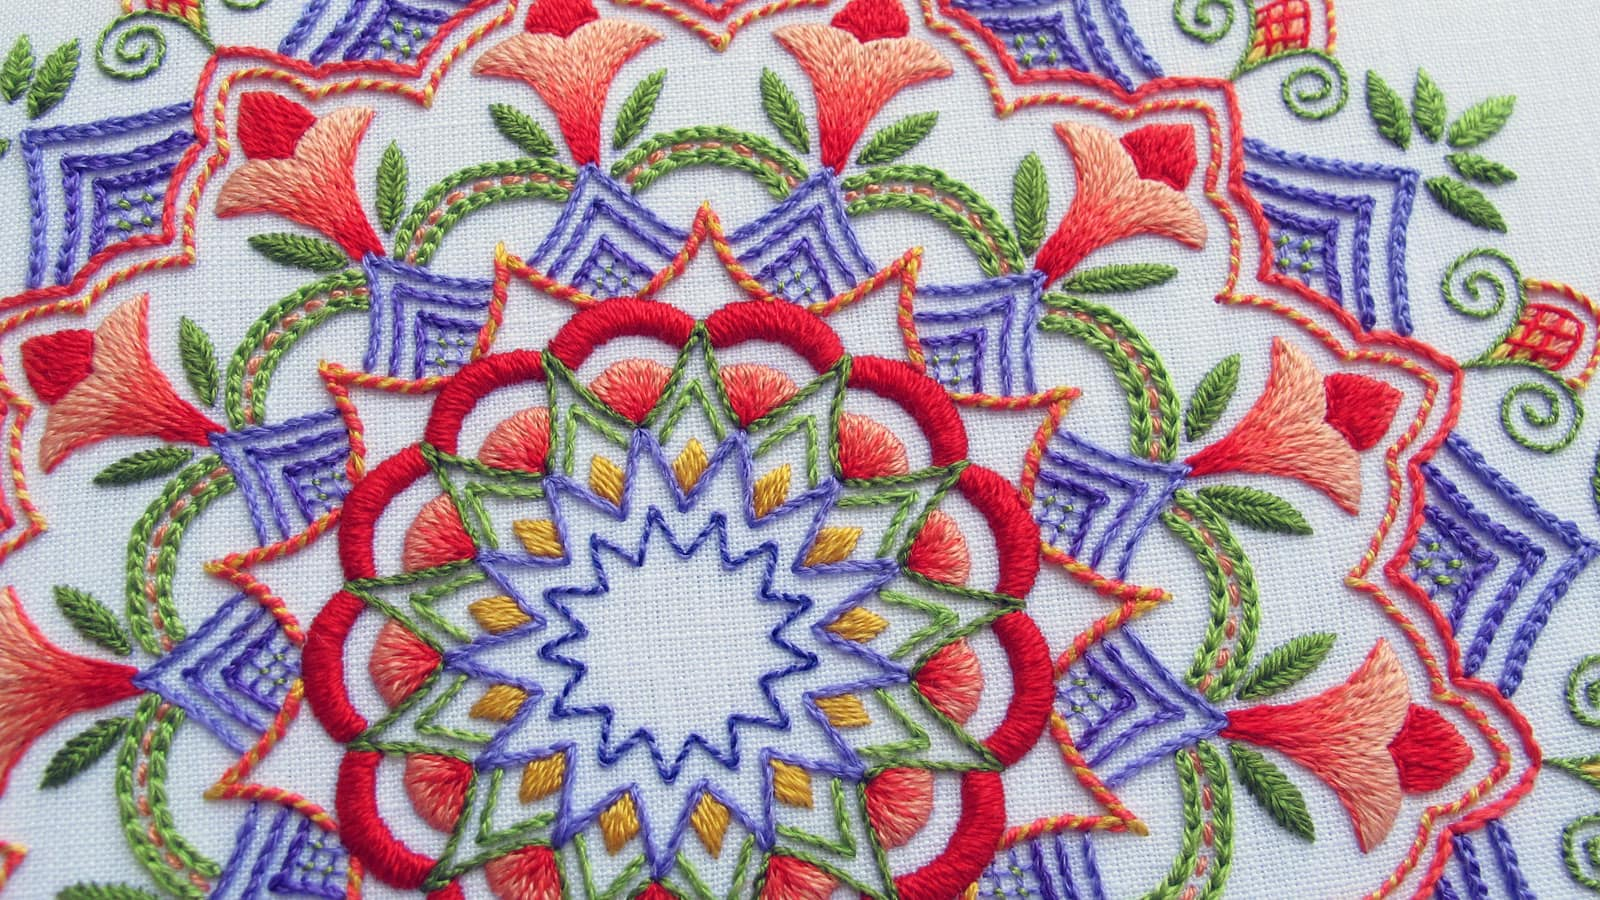 Hand Embroidery Patterns For Quilts Needlenthread Tips Tricks And Great Resources For Hand Embroidery